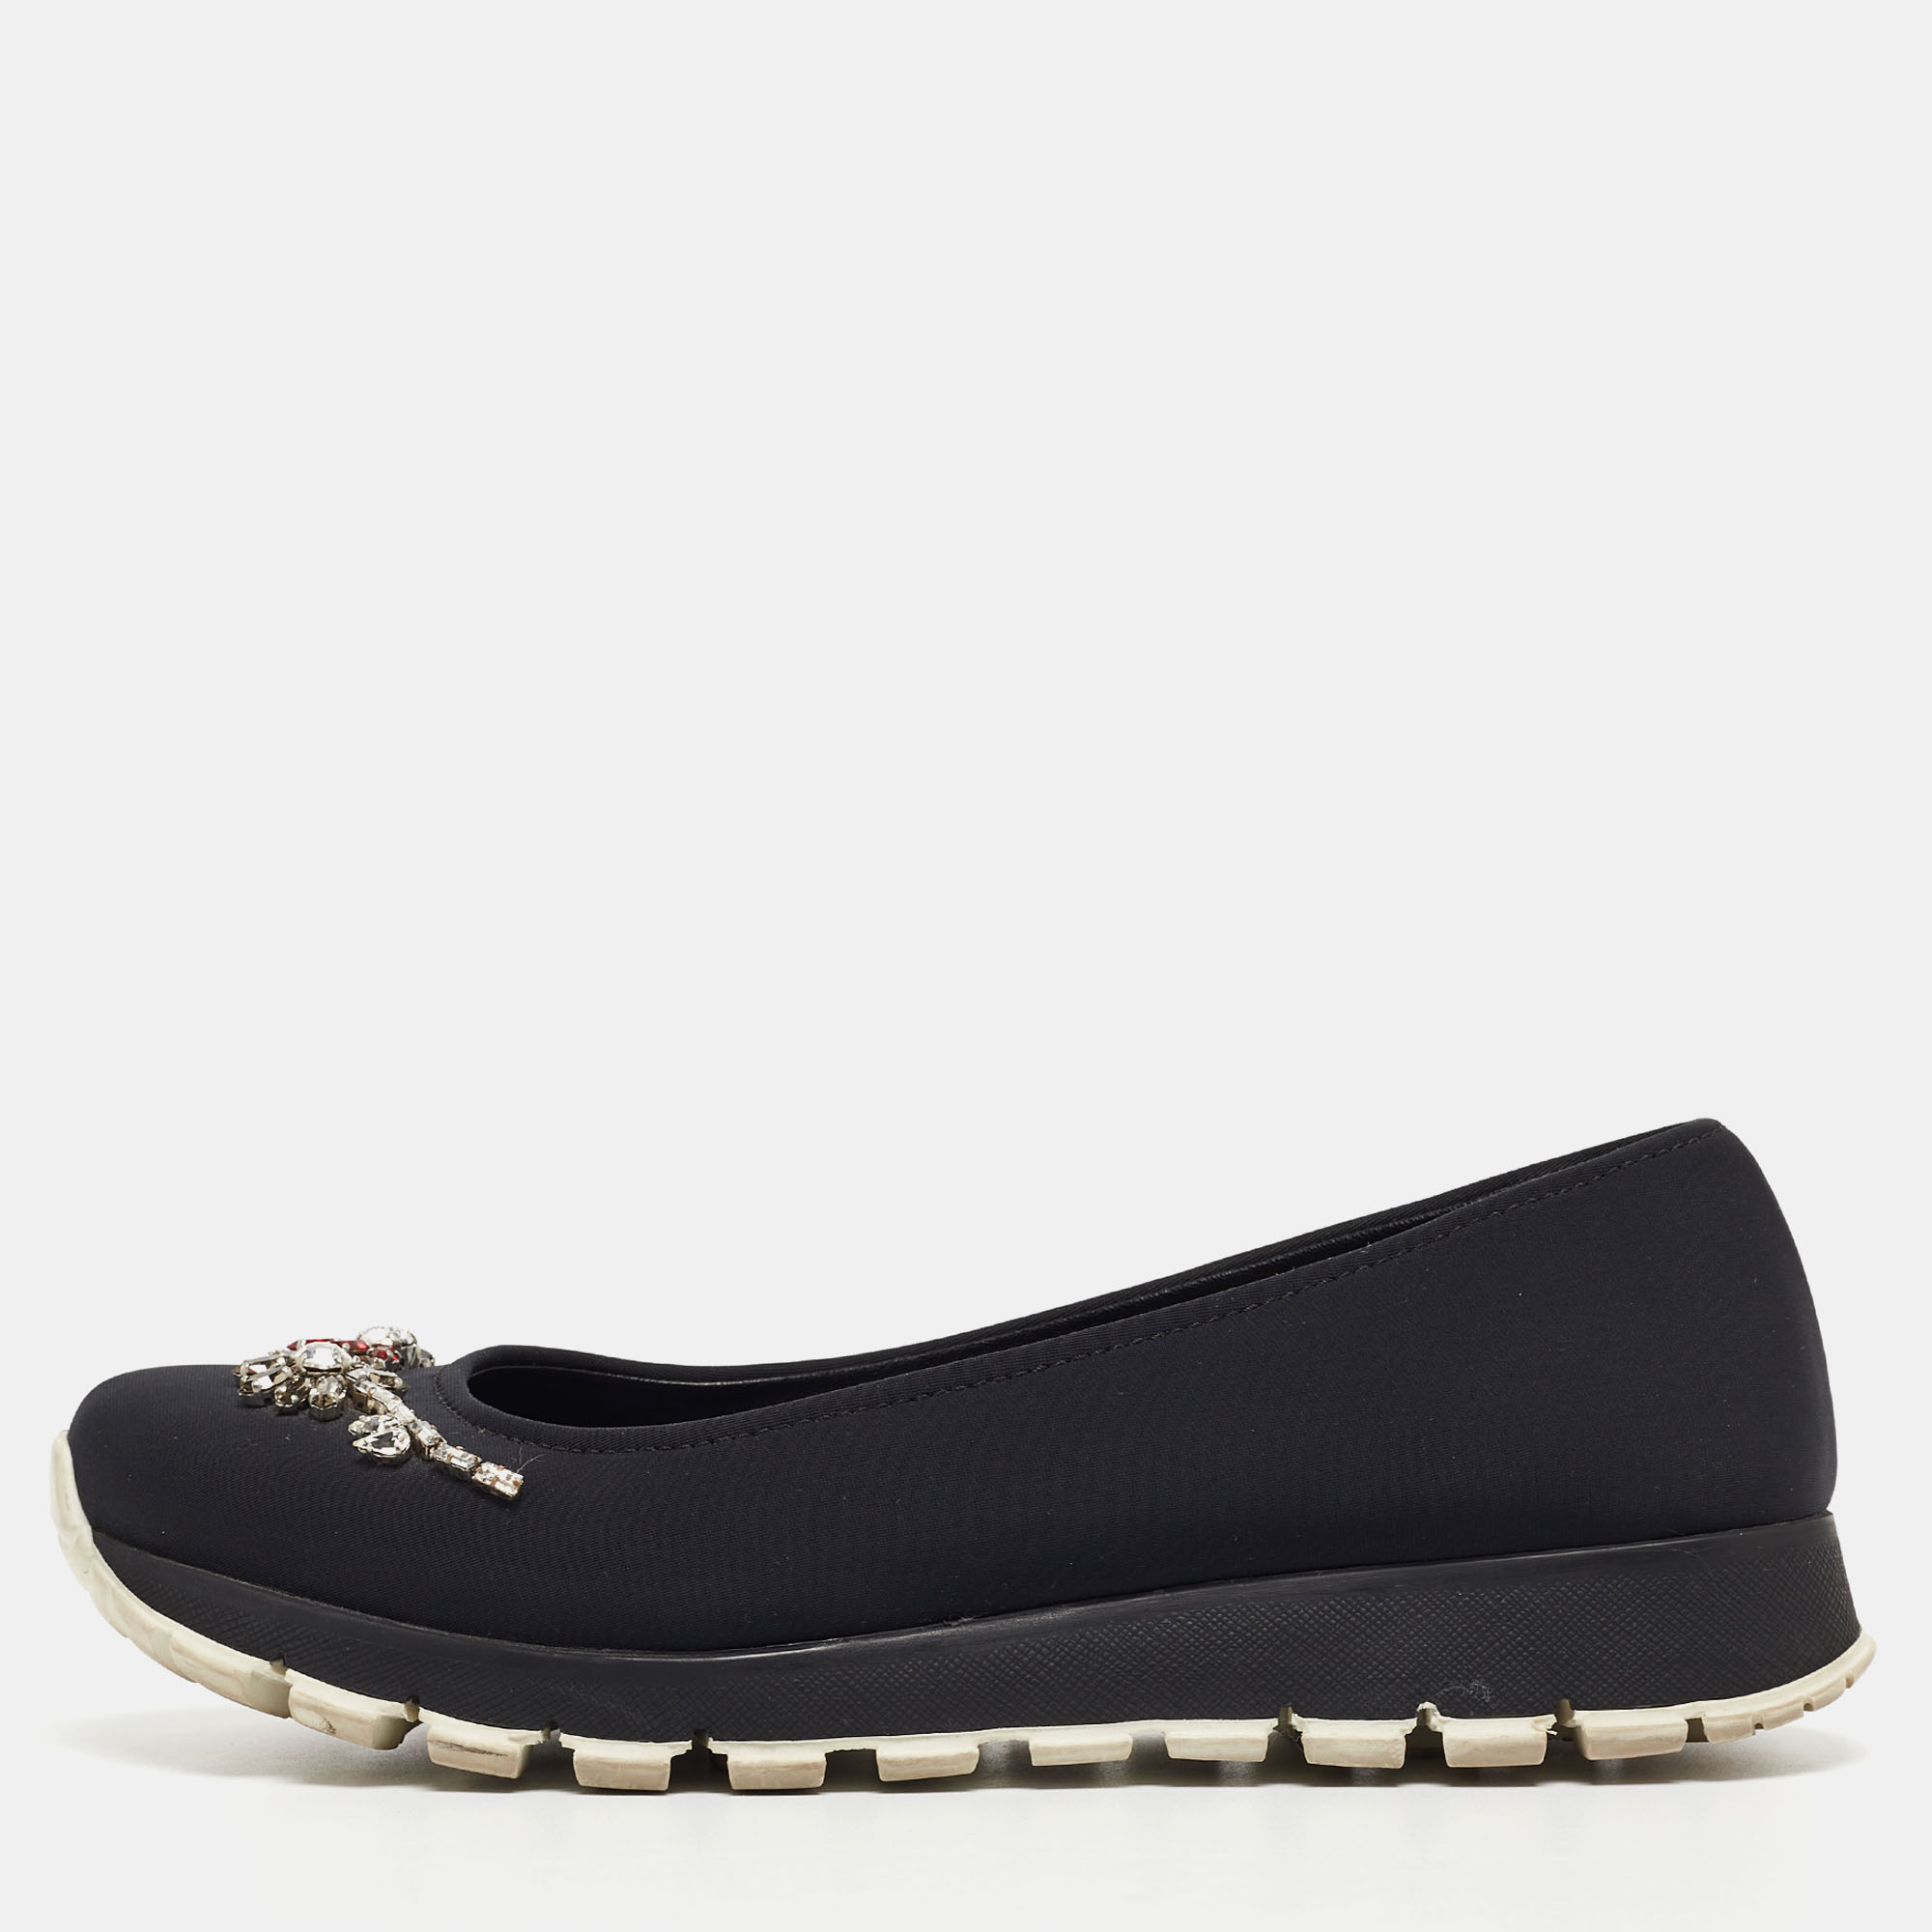 Beautifully crafted using neoprene these Prada slip on sneakers are sure to keep you comfortably stylish. Featuring crystals sturdy soles and leather insoles these shoes will be a great addition to your closet.